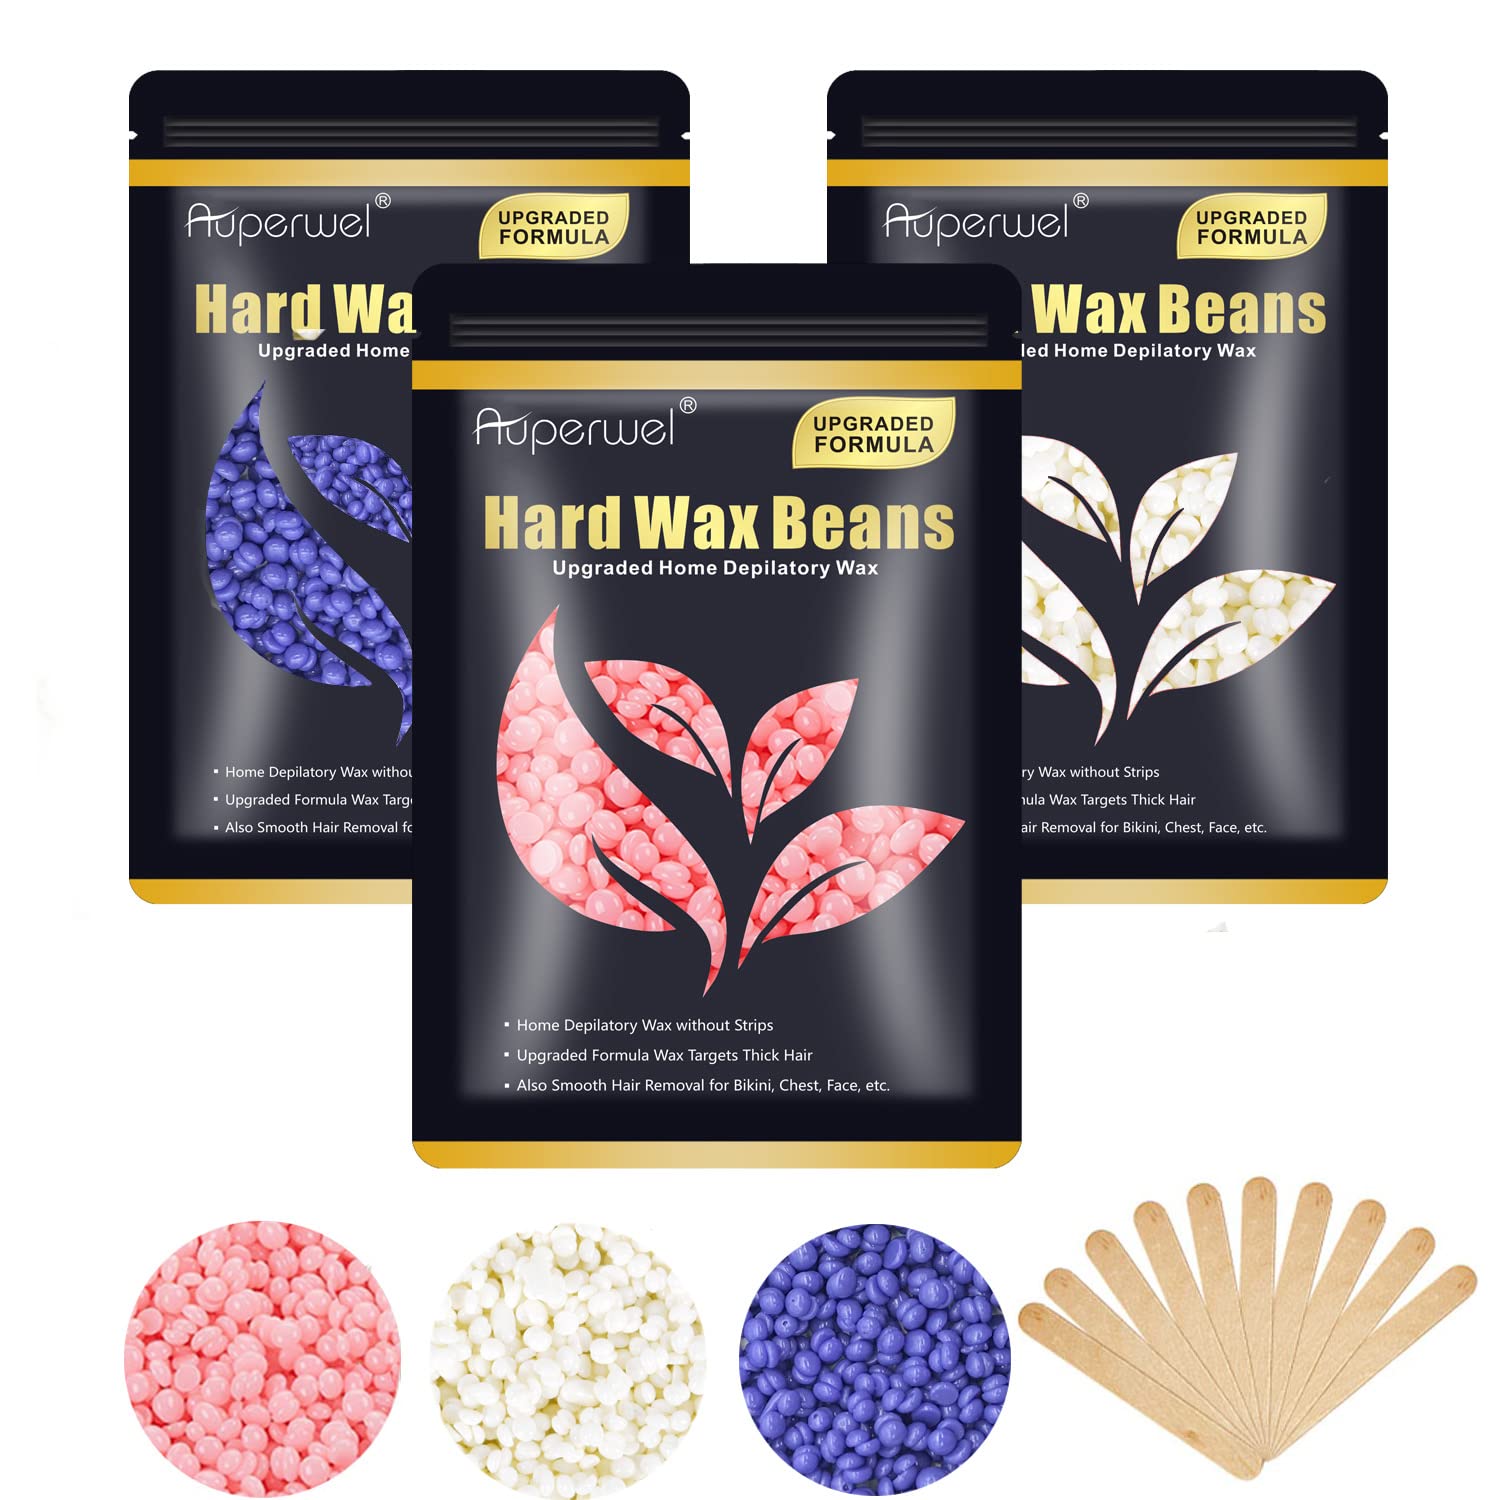 Hard Wax Beads for Hair Removal (300g/10.5oz) Painless Wax Beads - Full  Body Brazilian Bikini Wax Beads with 10pcs Applicators At Home Waxing Beads  for Face Eyebrow Legs Underarms Back Chest Perfect